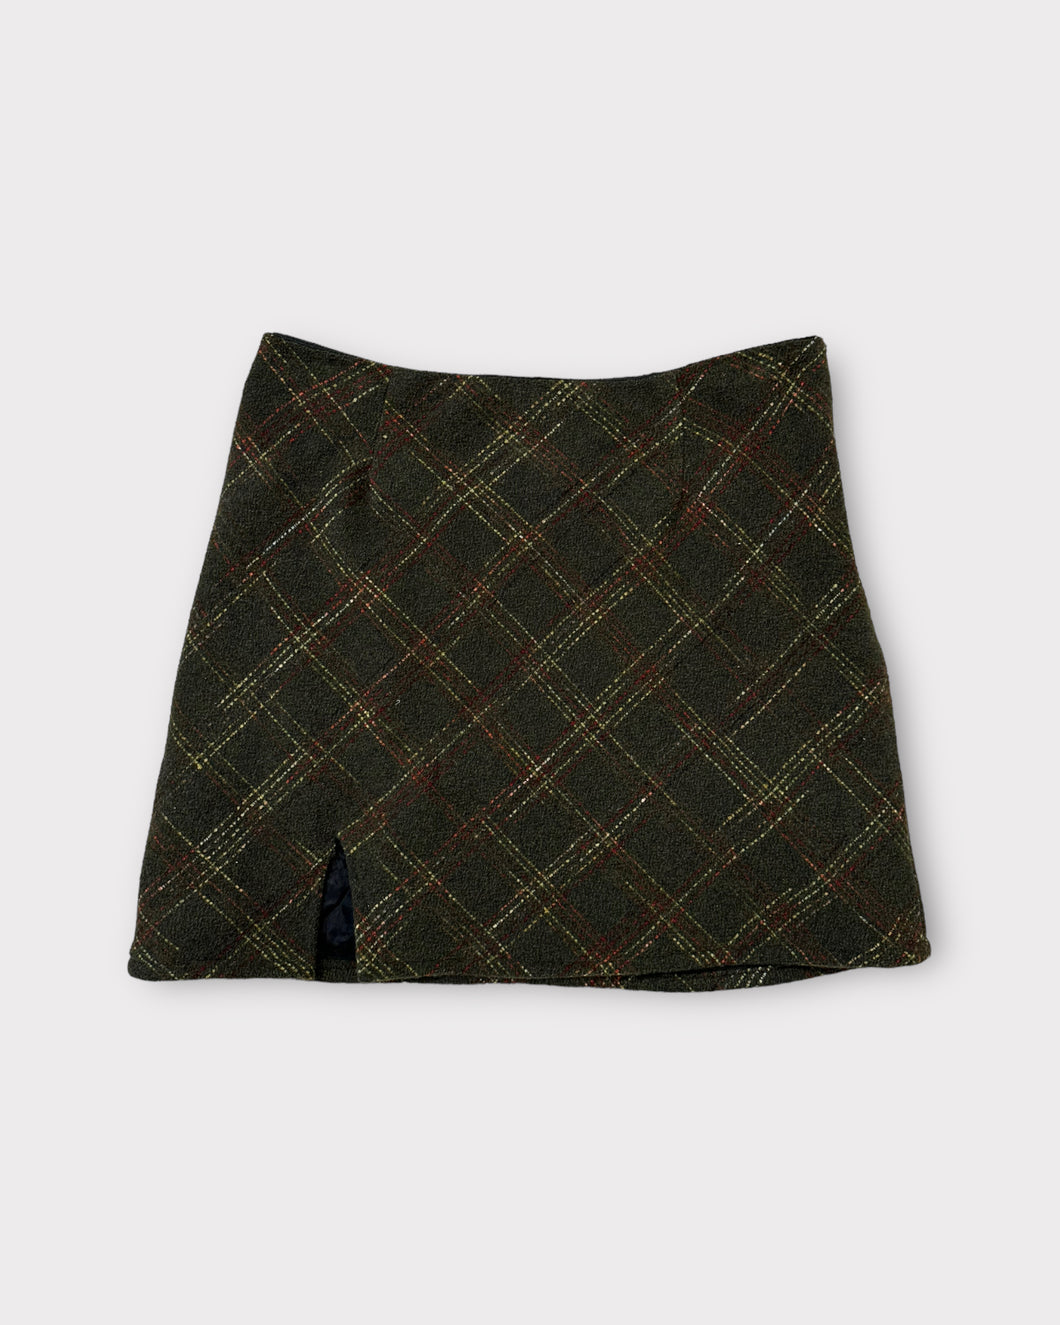 Clio Patterned Wool Mini Skirt (8)